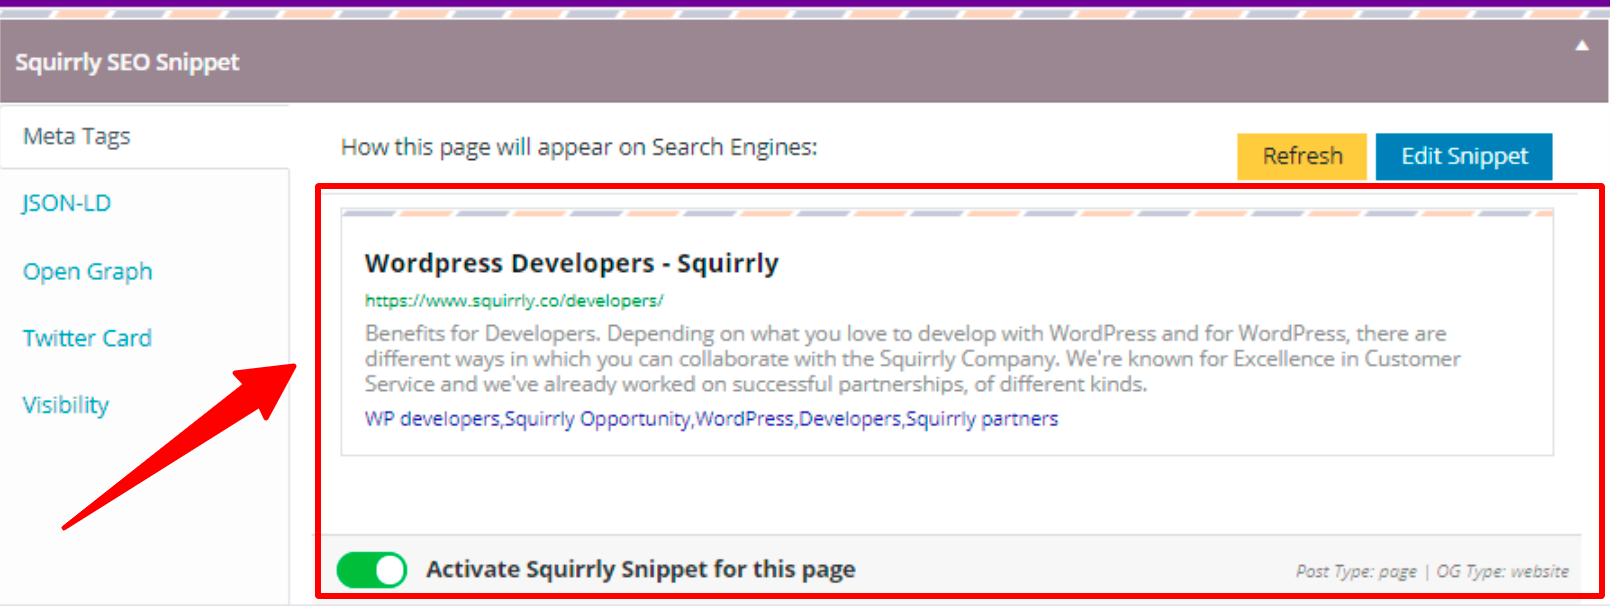 SEO Snippet Tool - Squirrly SEO